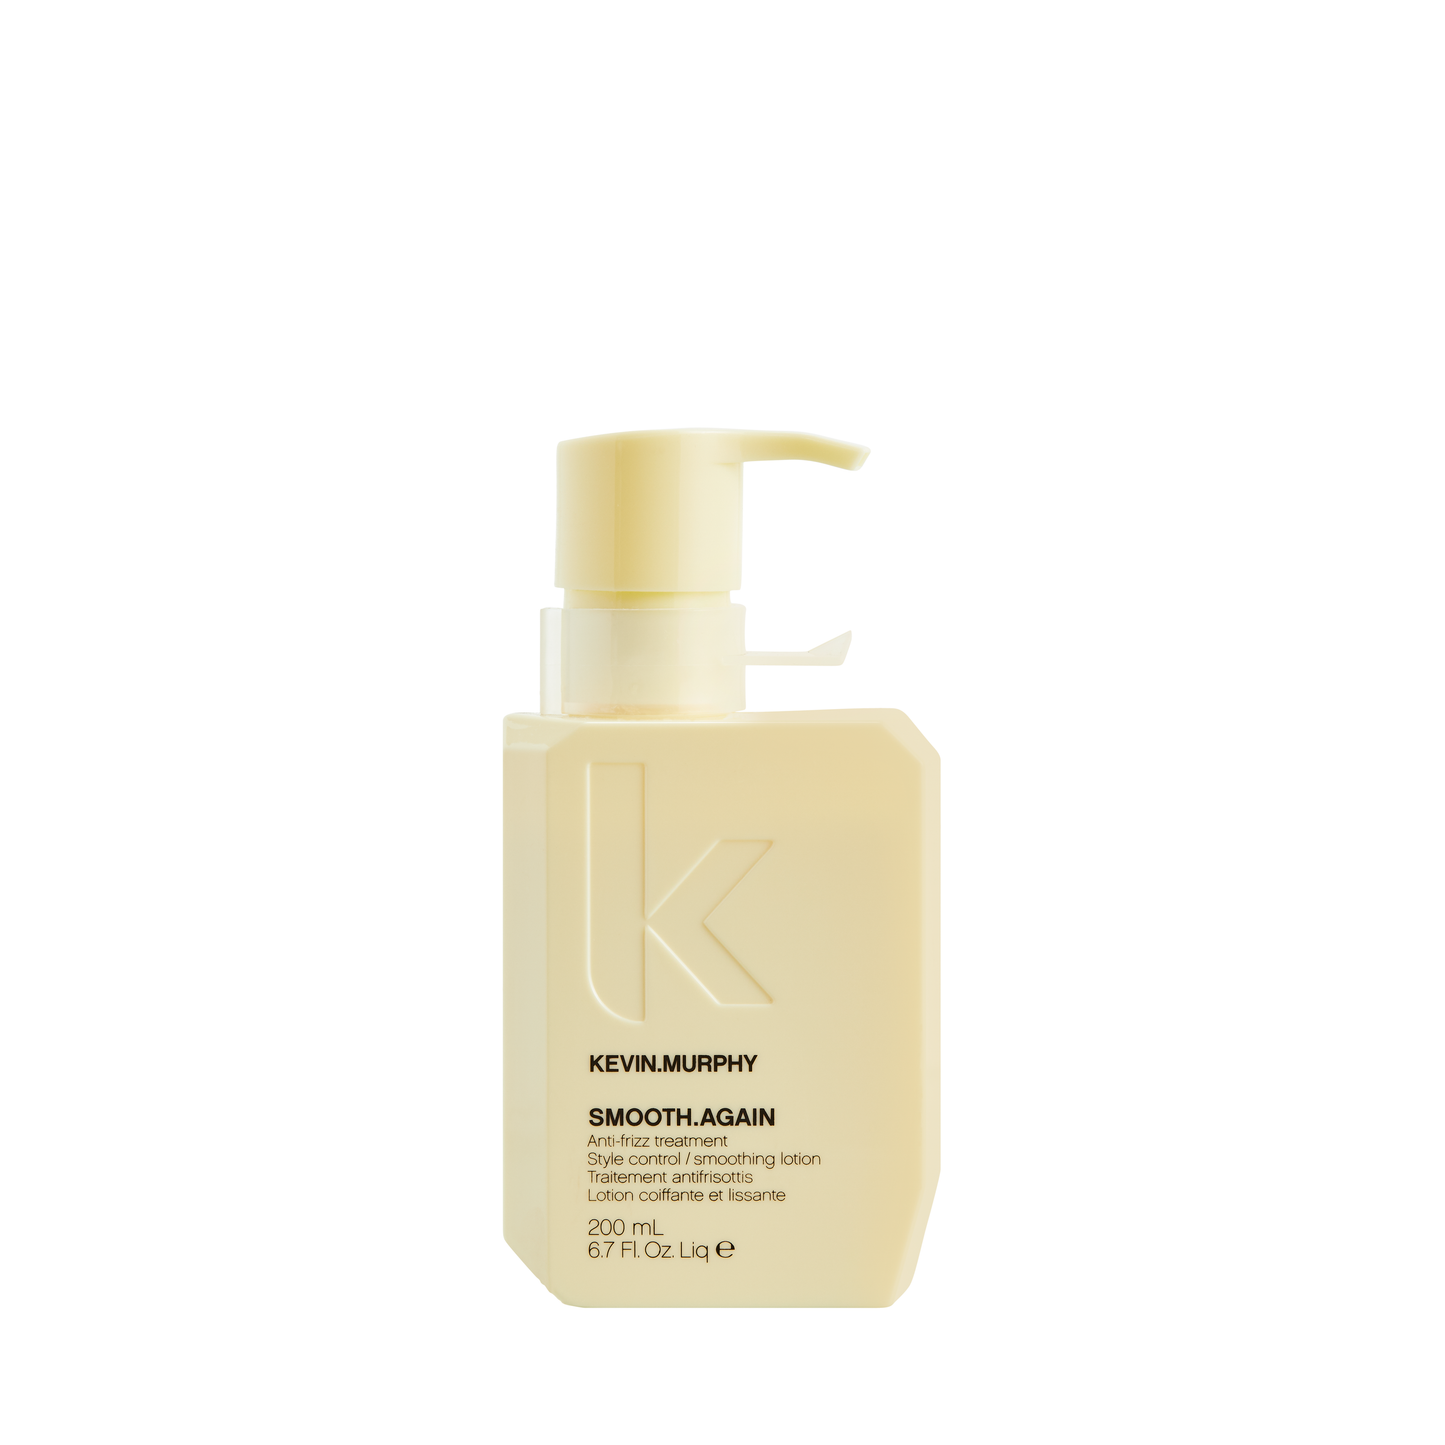 KEVIN.MURPHY - SMOOTH.AGAIN